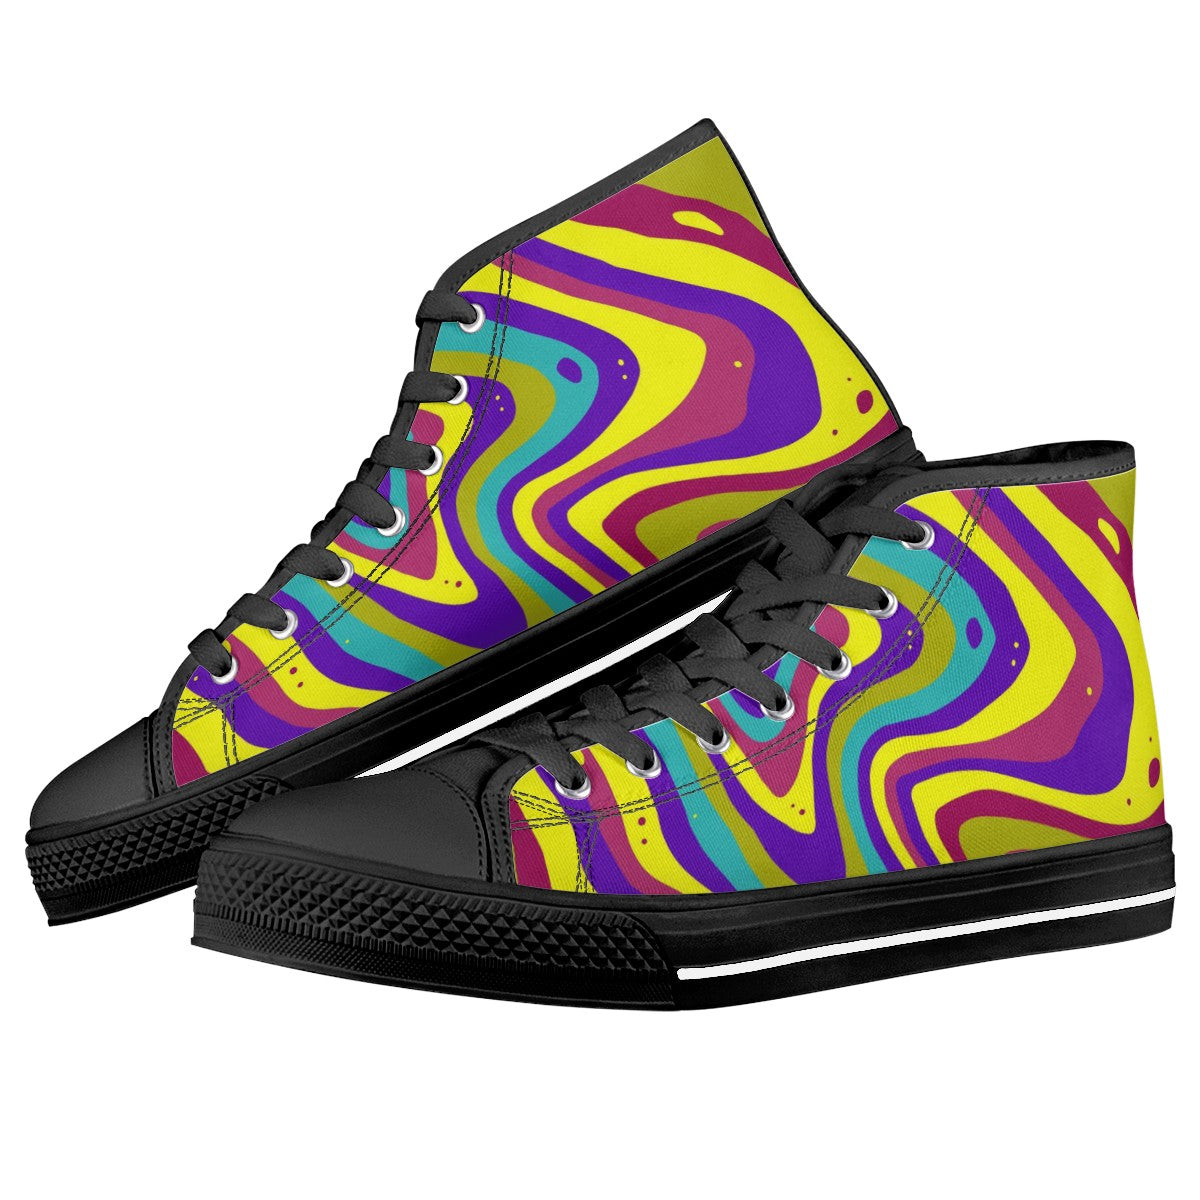 Groovy Hippie Black High Top Canvas Shoes